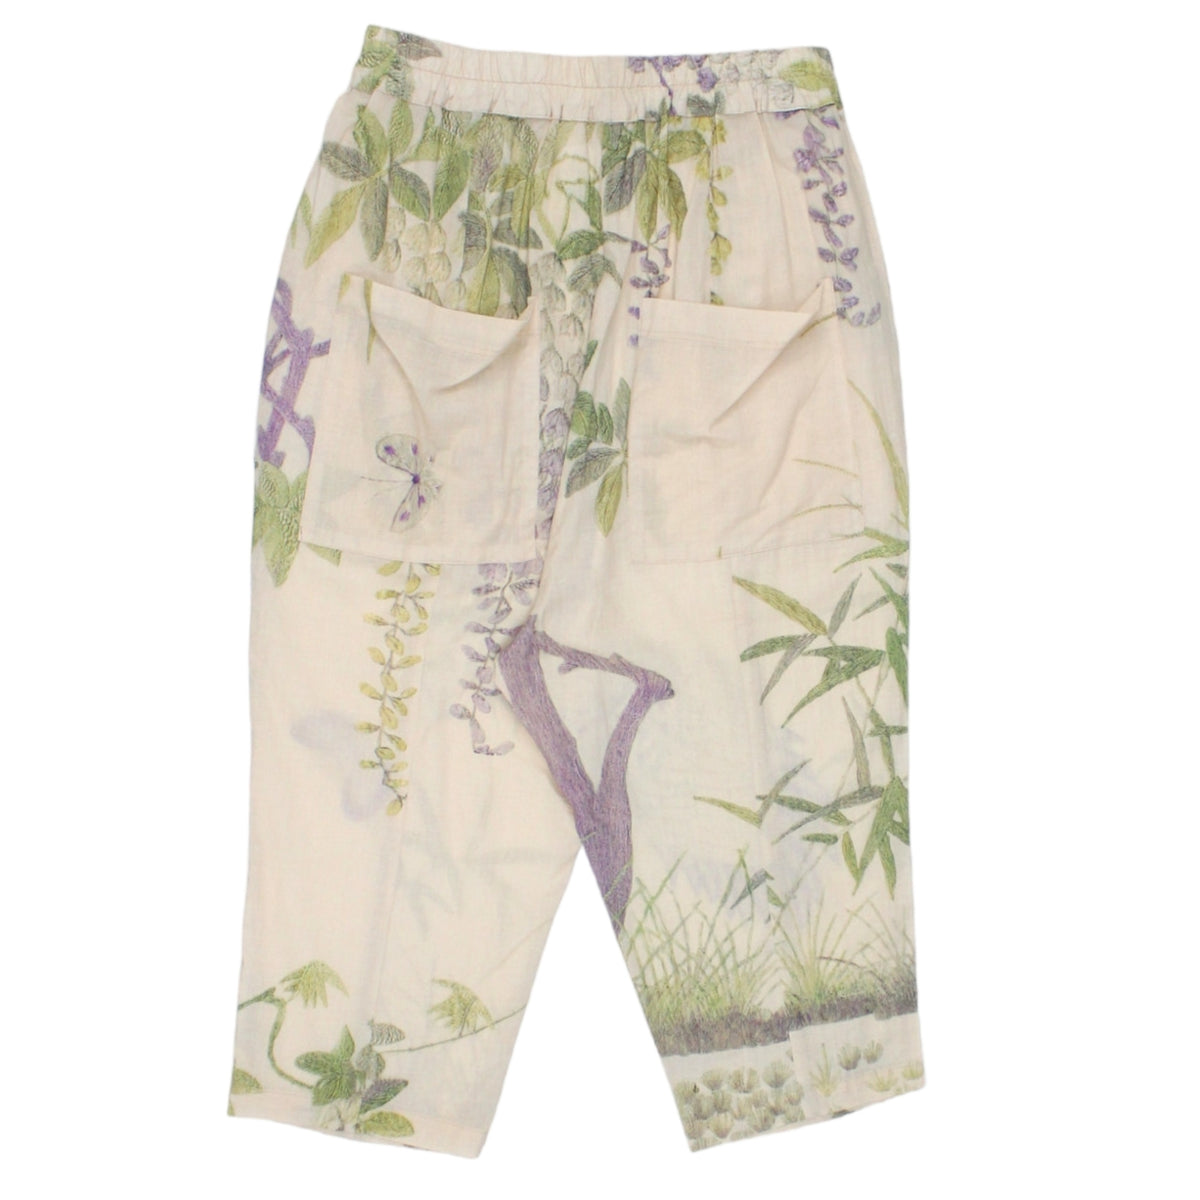 By Walid Cream Floral Long Shorts